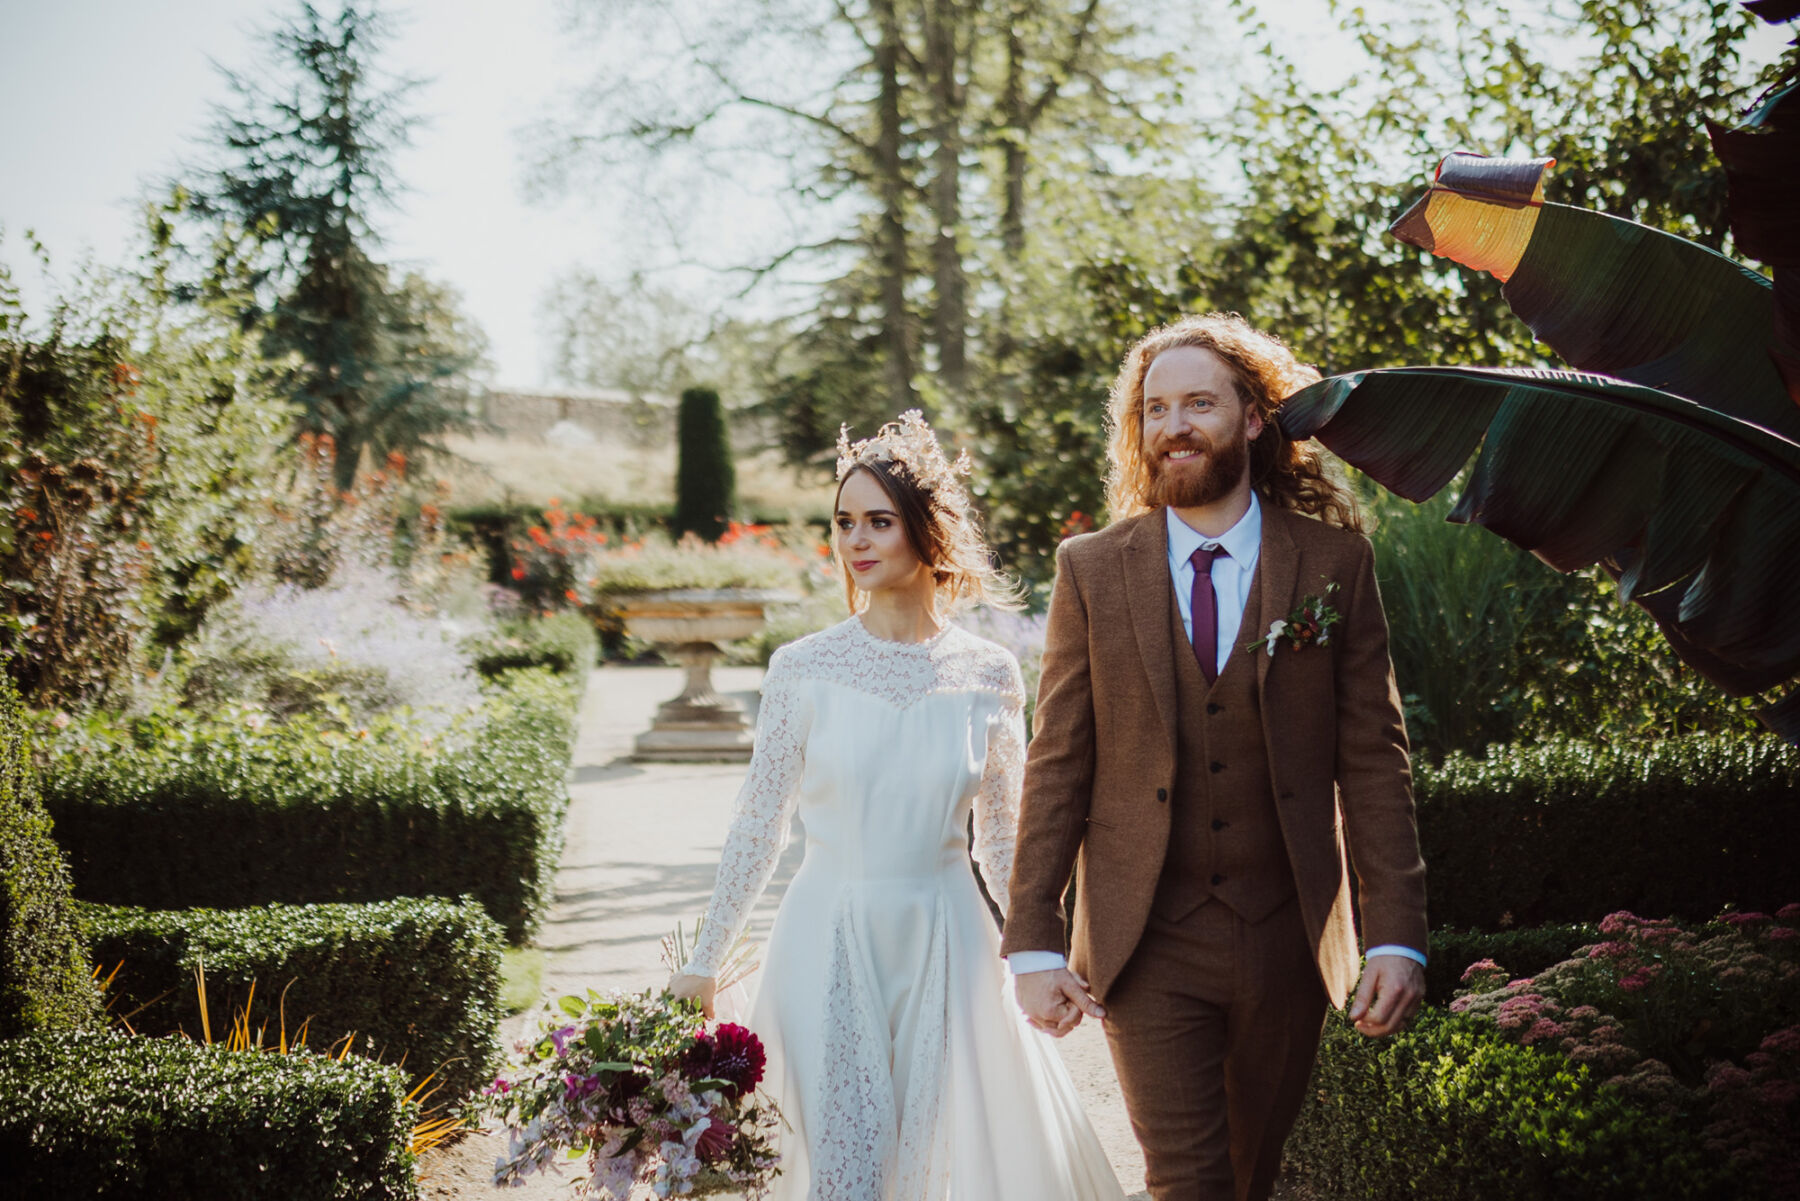 Bride wearing a vintage lace wedding dress and a bridal crown. Groom in a brown suit. Gardens at Bishop's Palace historic wedding venue in Wells, Somerset.